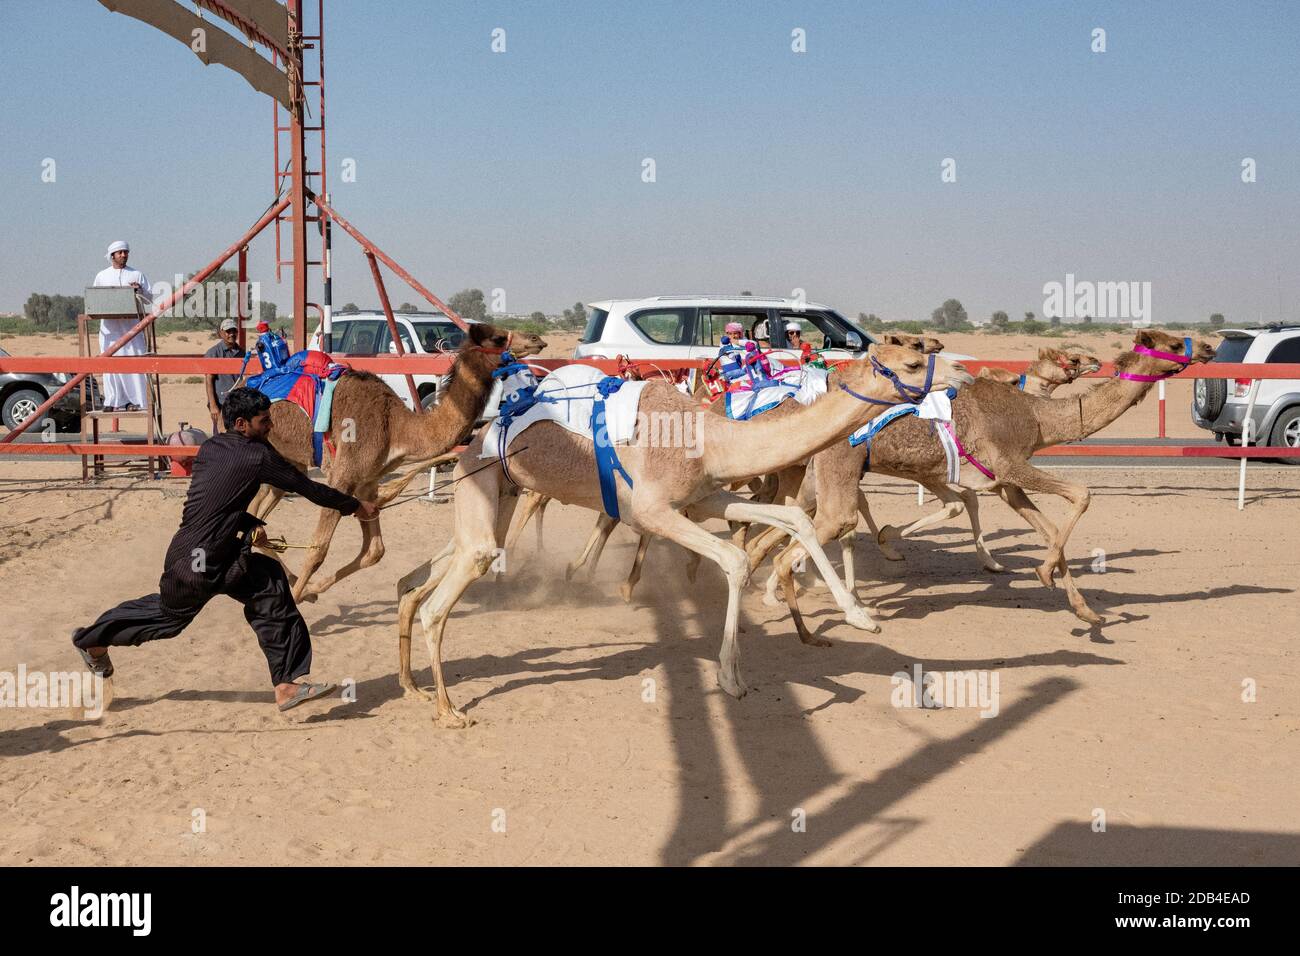 United Arab Emirates / Al Dhaid / Camel Race Track  in Central Region of the Emirate of Sharjah in the United Arab Emirates. As the races get underway Stock Photo